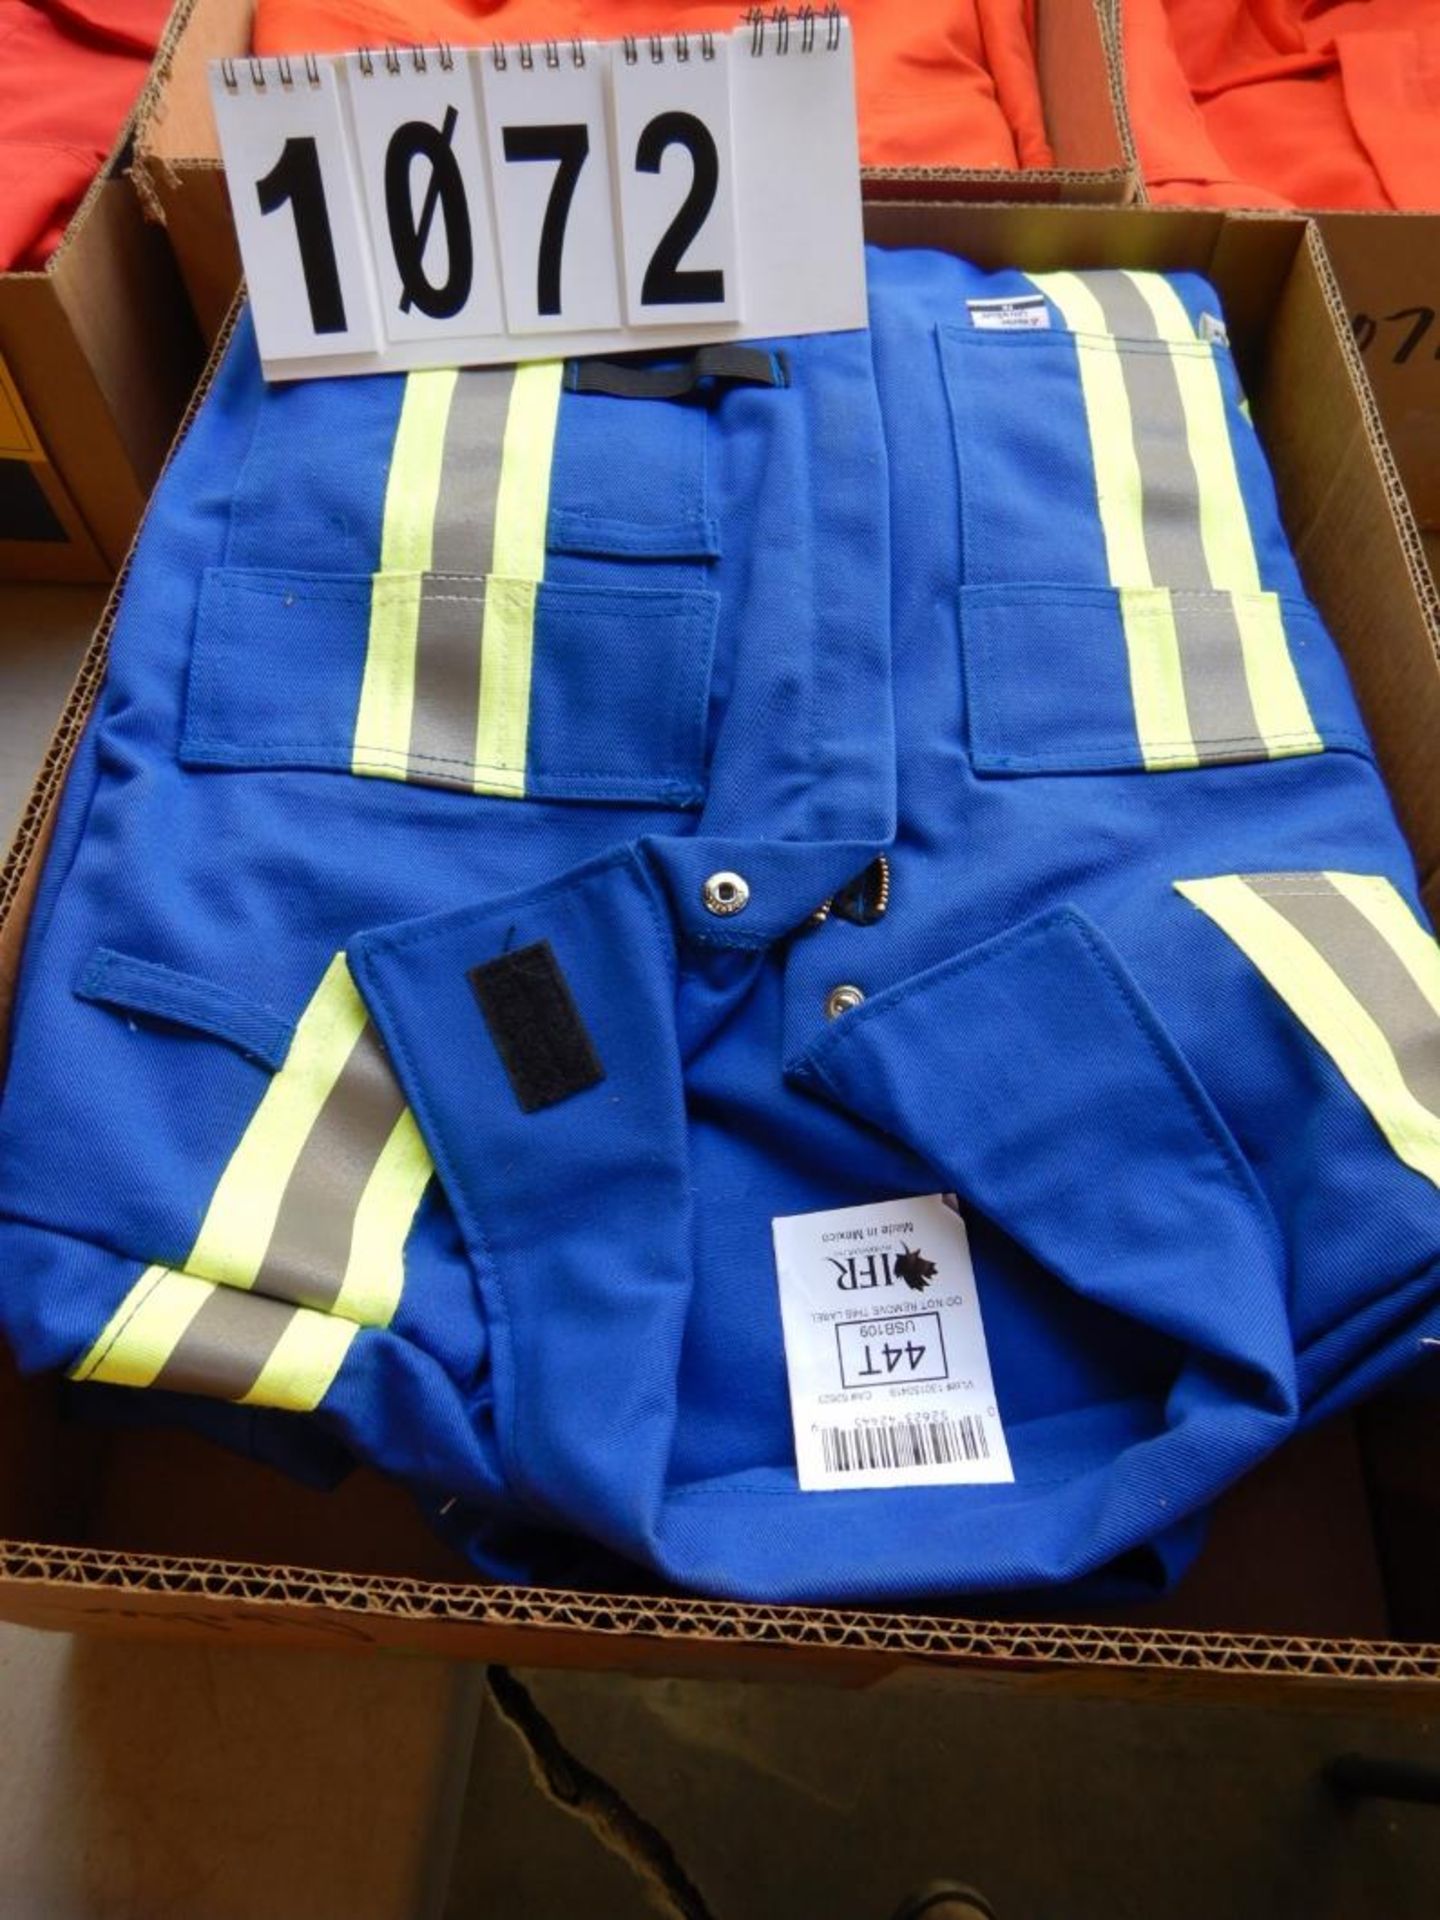 L/O 3-WESTEX IFR BLUE SAFETY COVERALLS, SIZE 44T